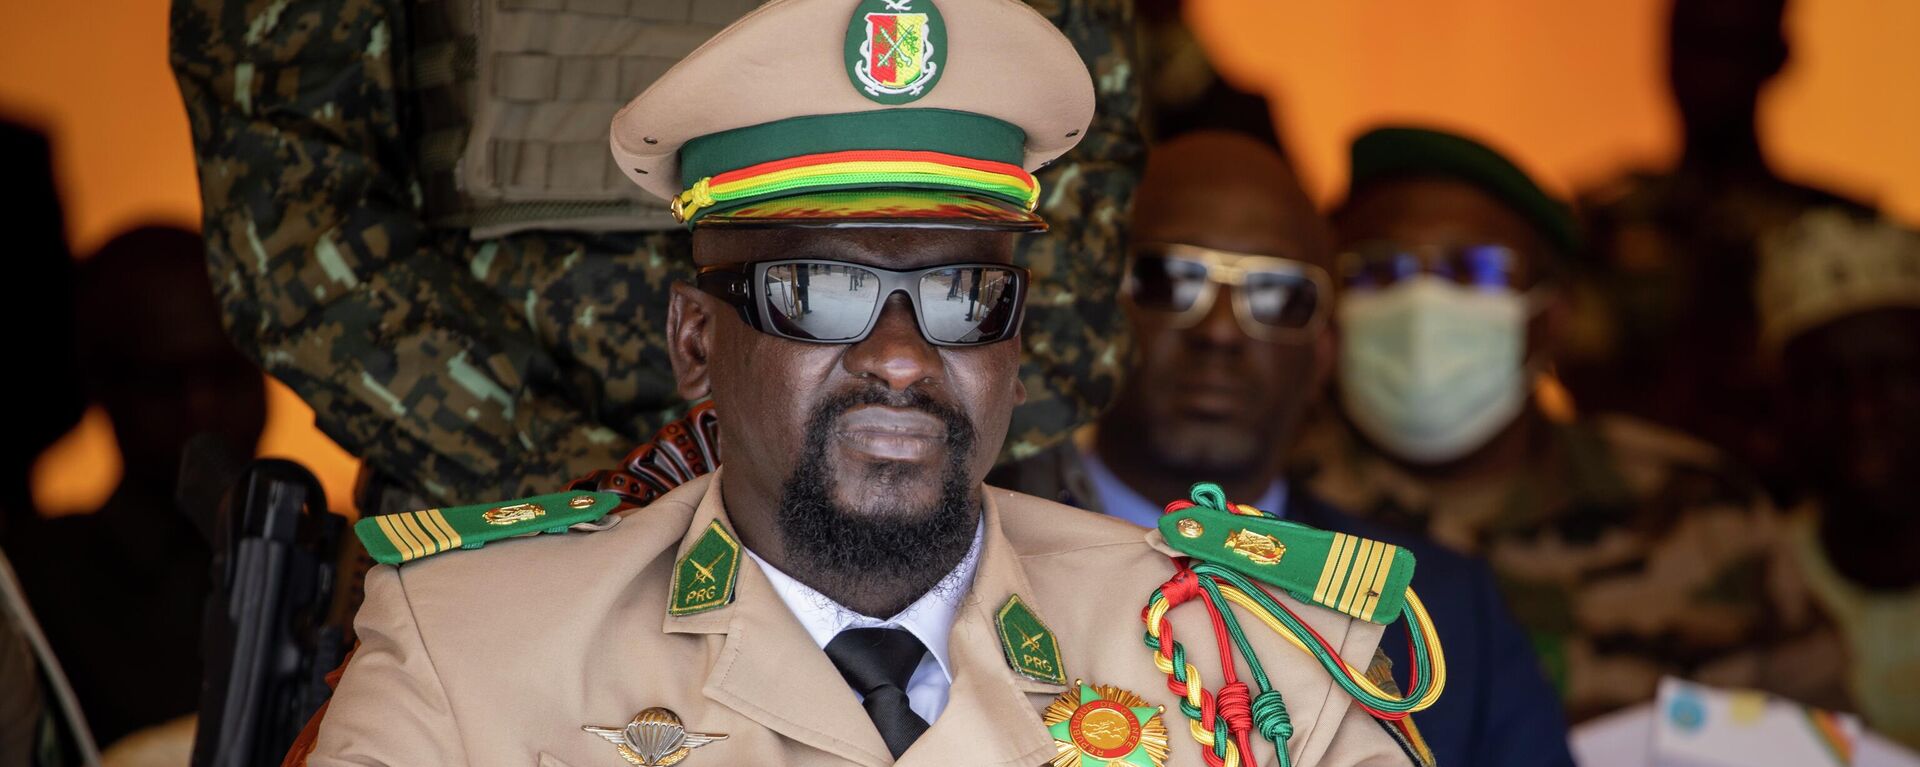 Guinea's junta leader Col. Mamady Doumbouya watches over an independence day military parade in Bamako, Mali Thursday, Sept. 22, 2022.  - Sputnik Africa, 1920, 01.08.2023